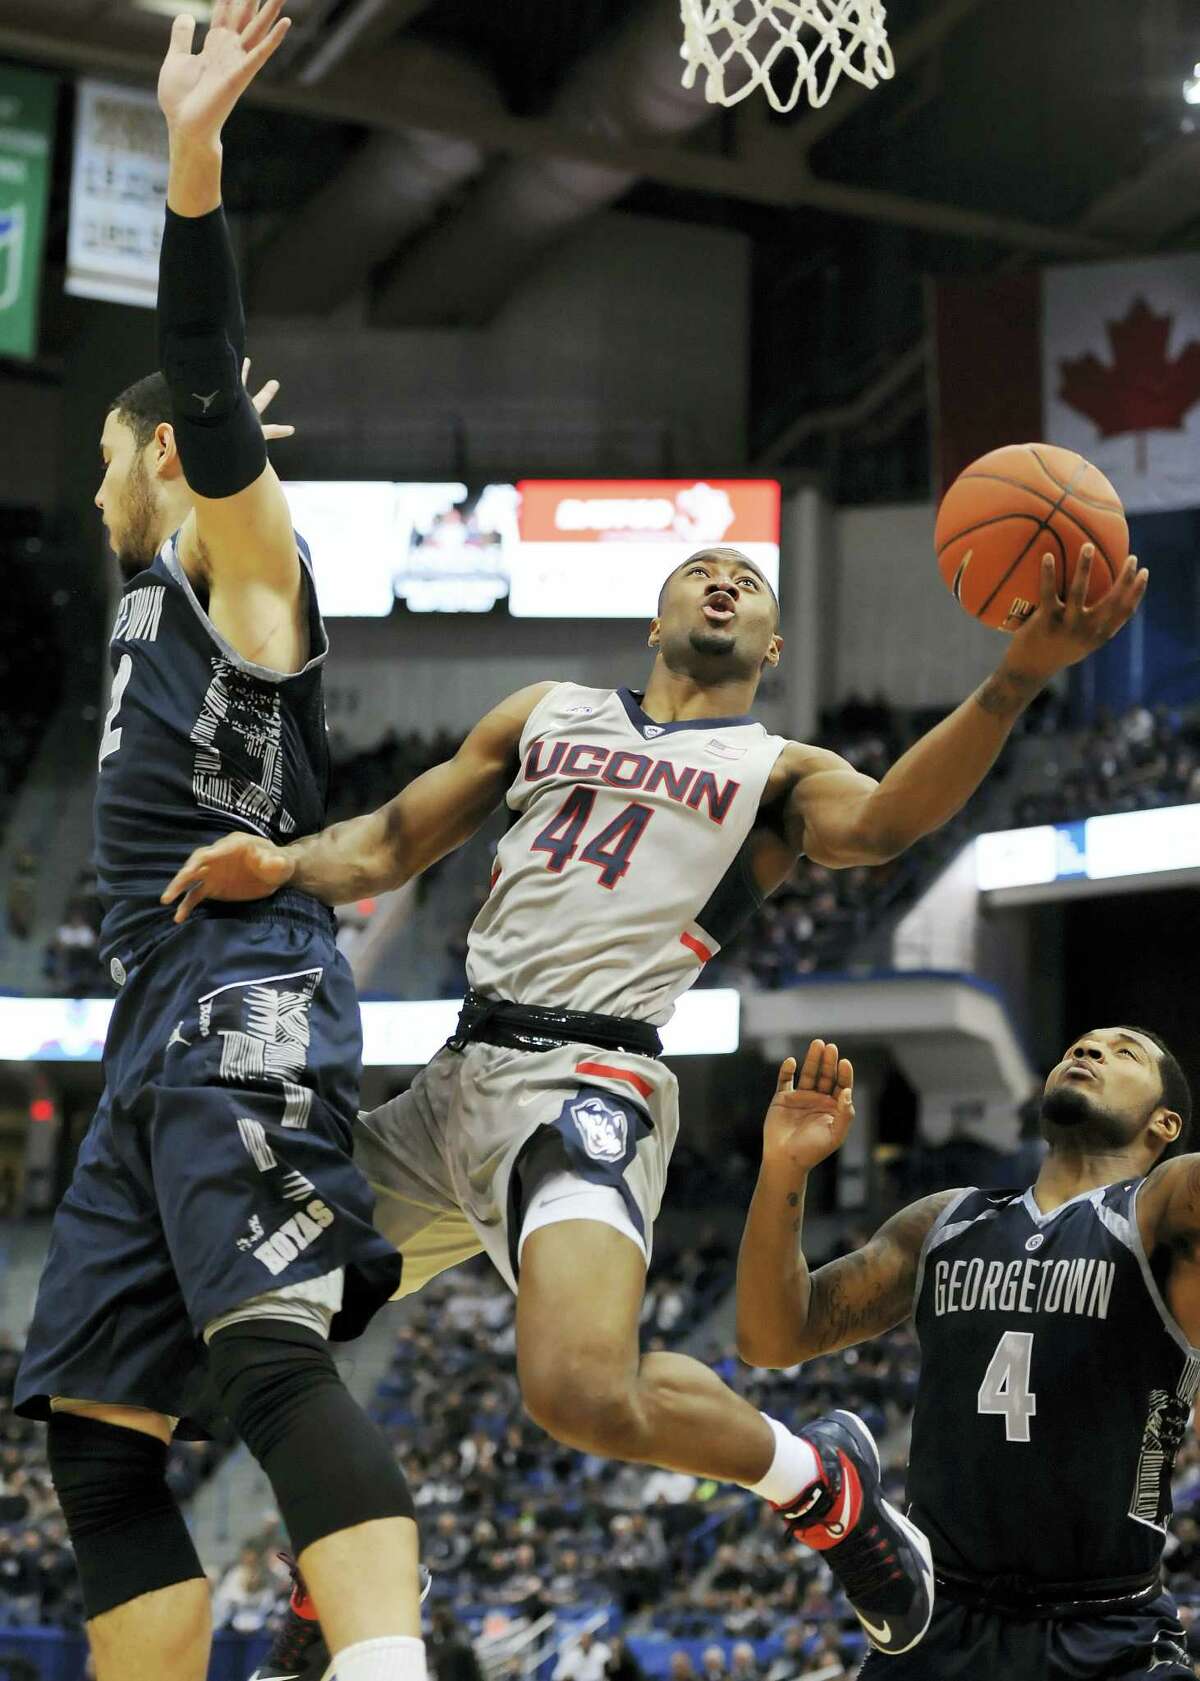 UConn’s Rodney Purvis shoots between Georgetown’s Bradley Hayes, left, and D’Vauntes Smith-Rivera, right, in the first half Saturday in Hartford.